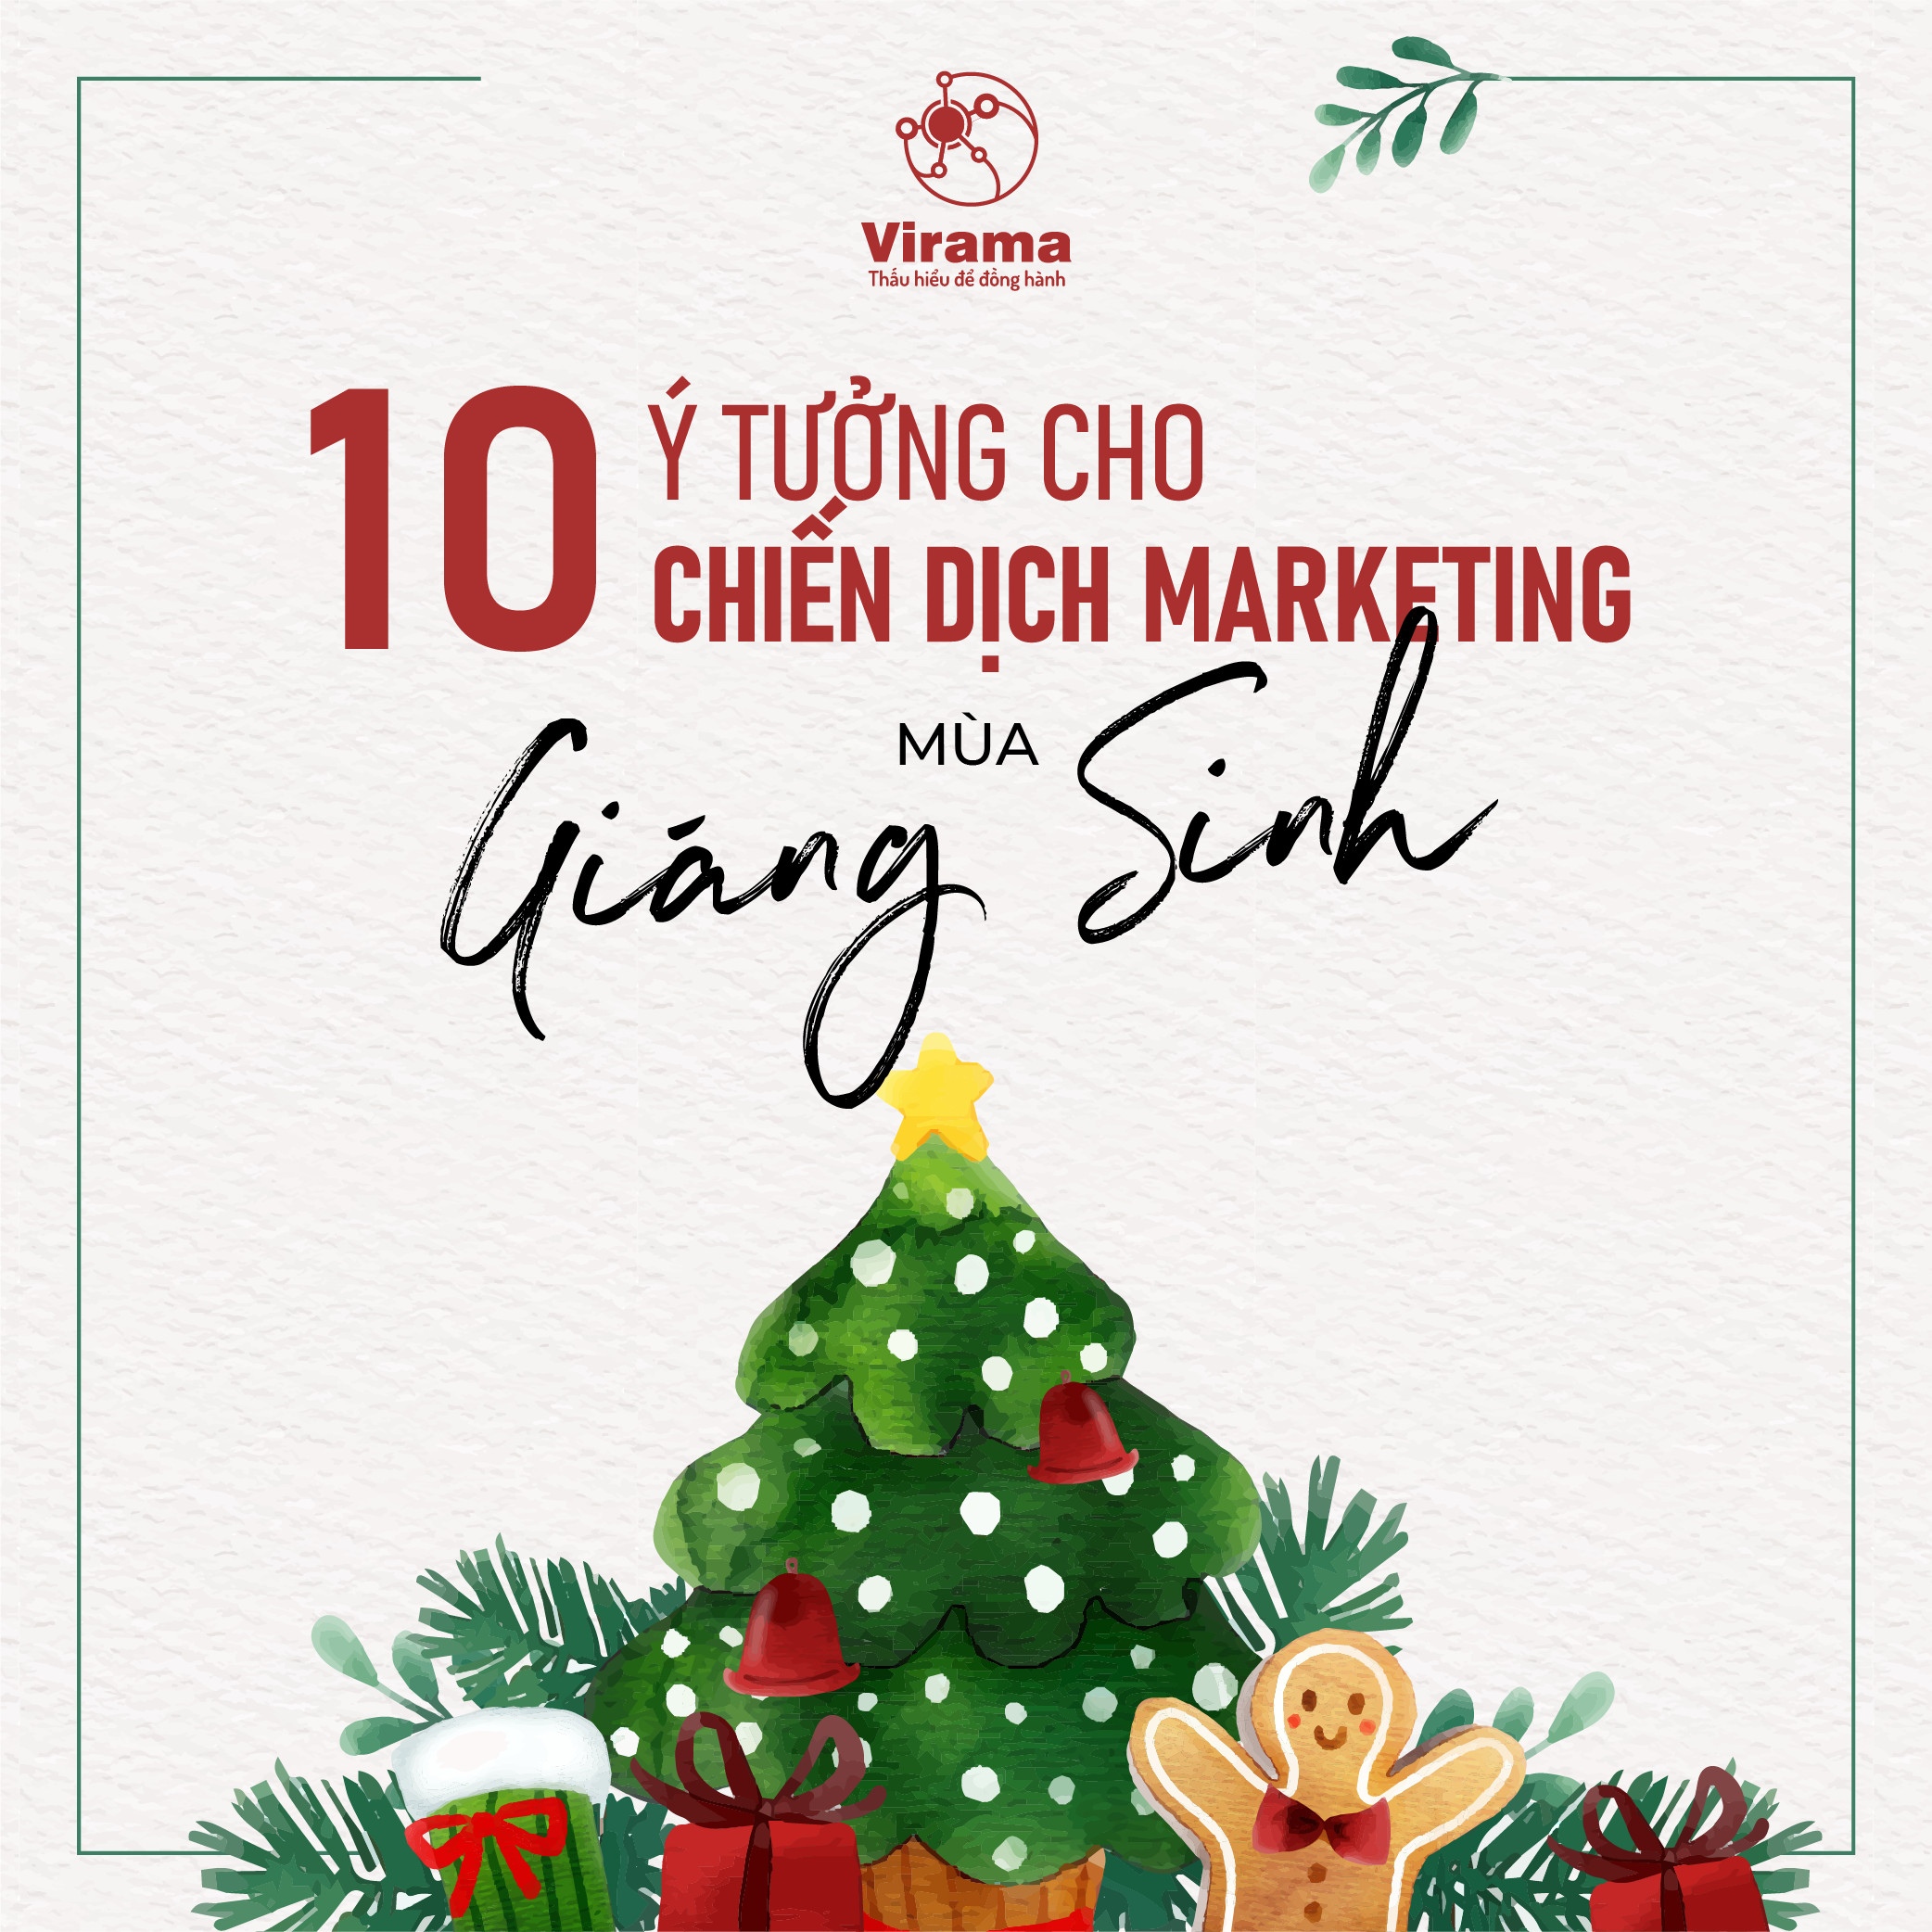 chien-dich-marketing-giang-sinh-1